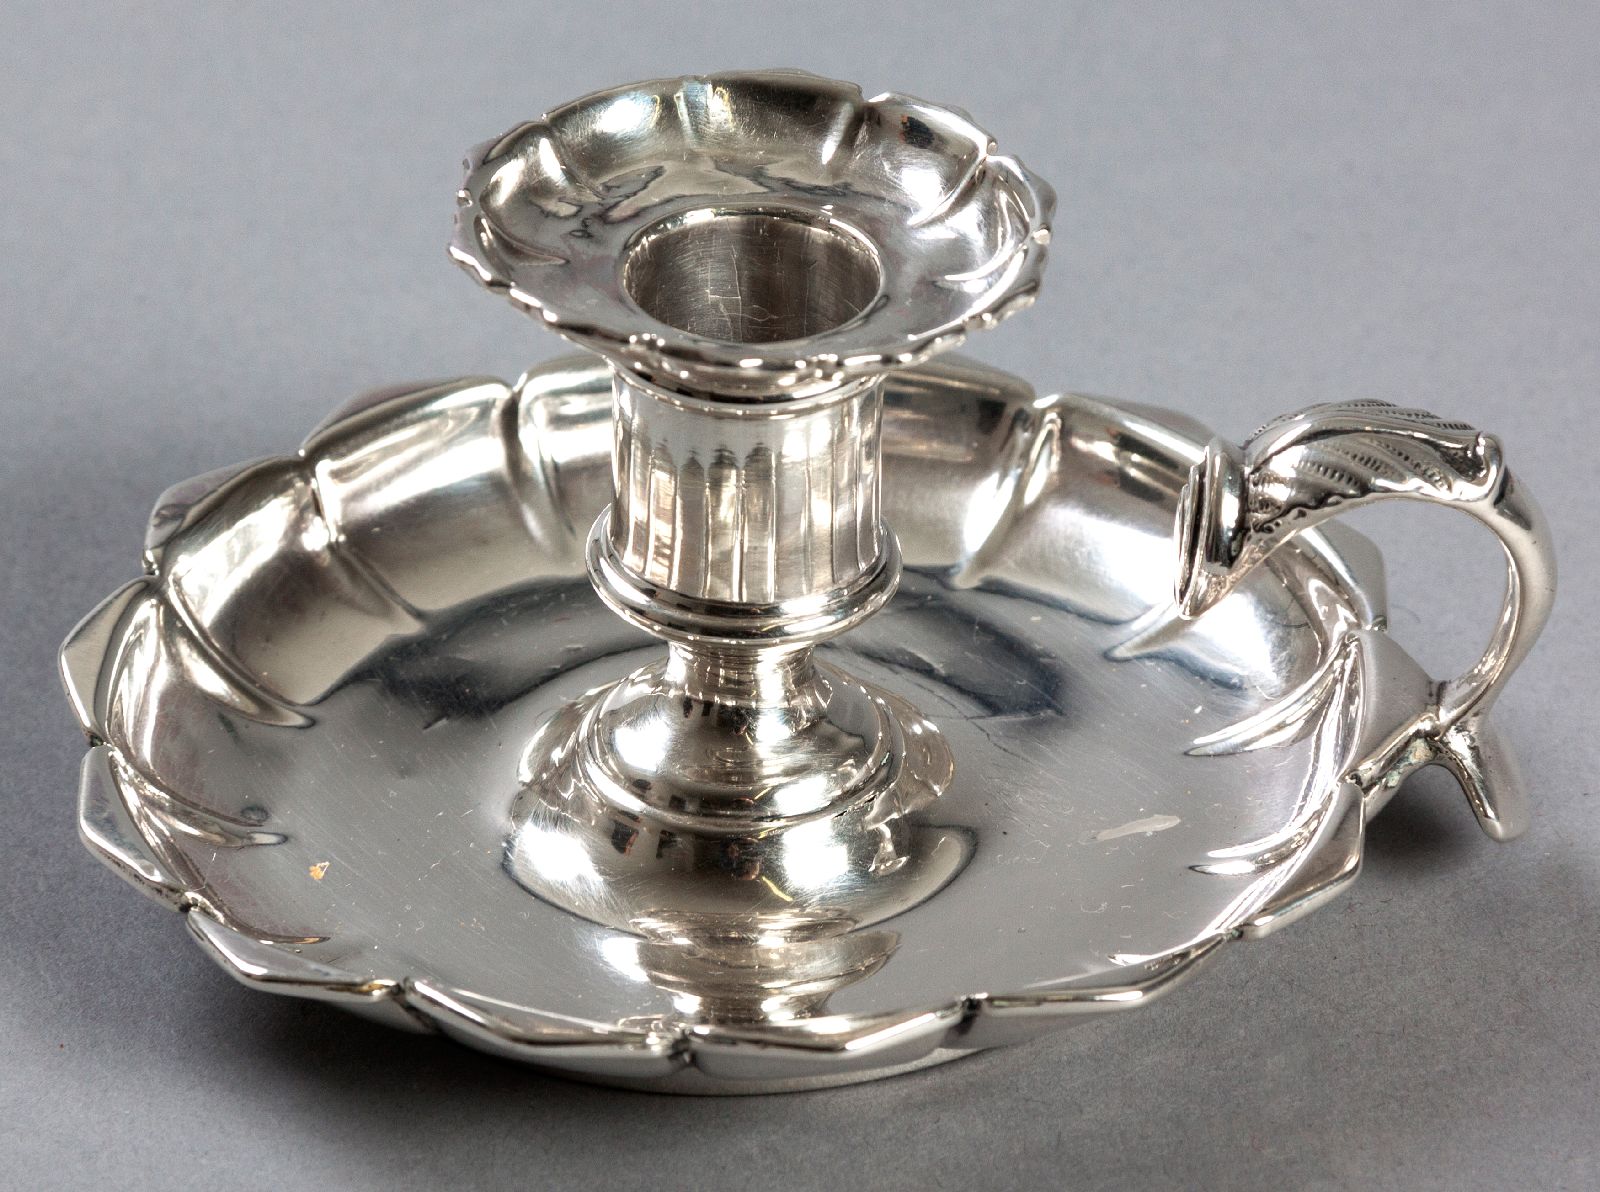 A GEORGE IV SILVER CHAMBERSTICK, BIRMINGHAM 1825, R.E.A., with a linen fold removable wax pan,